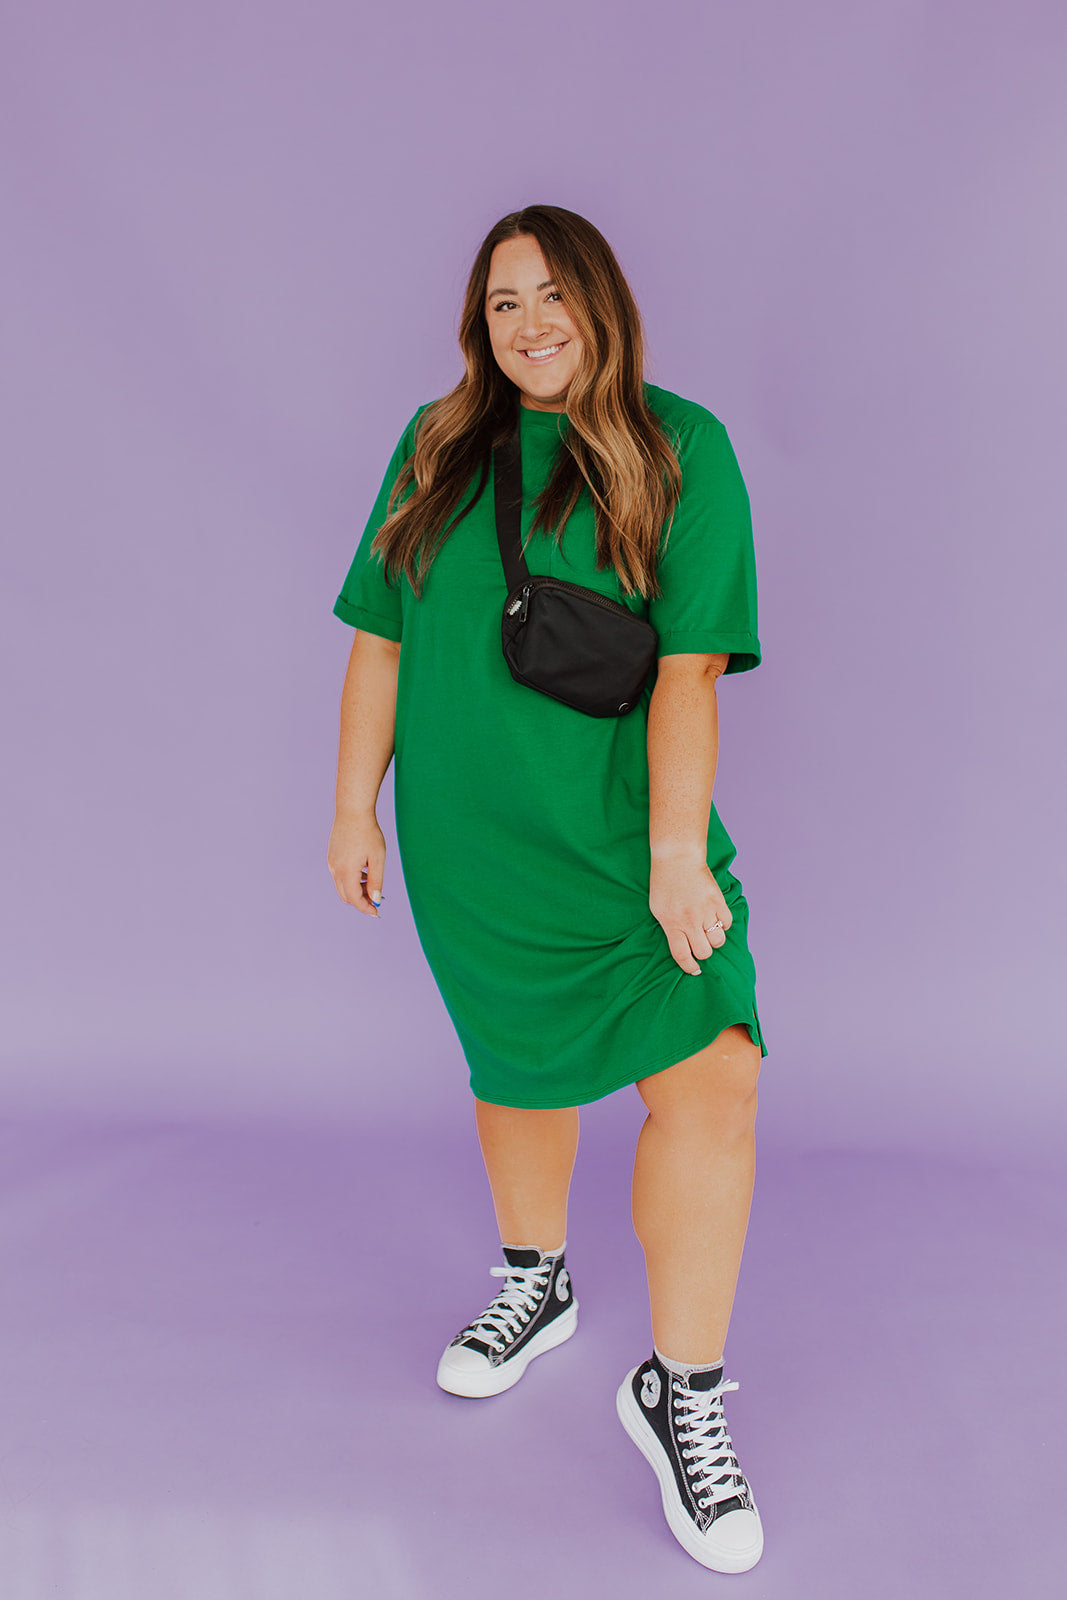 THE EASY DOES IT POCKET T-SHIRT DRESS BY PINK DESERT IN KELLY